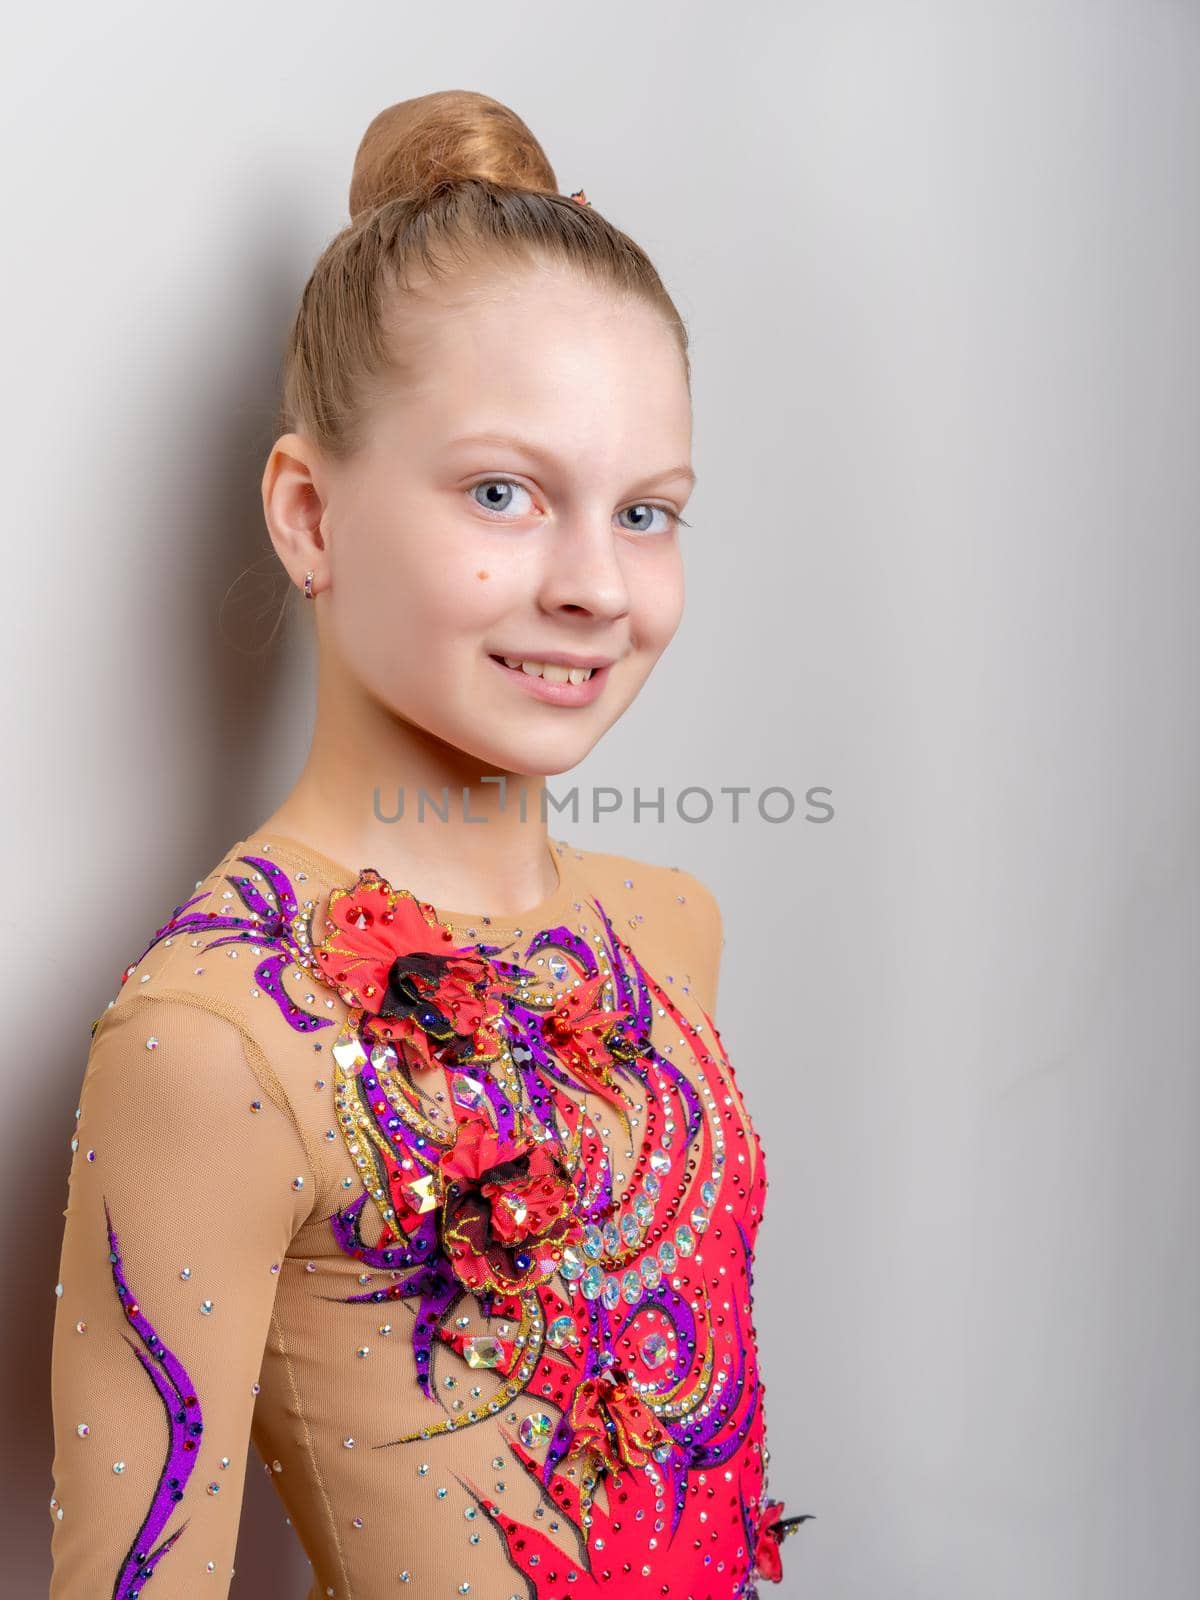 A little girl gymnast in a suit for competitions near the wall. by kolesnikov_studio